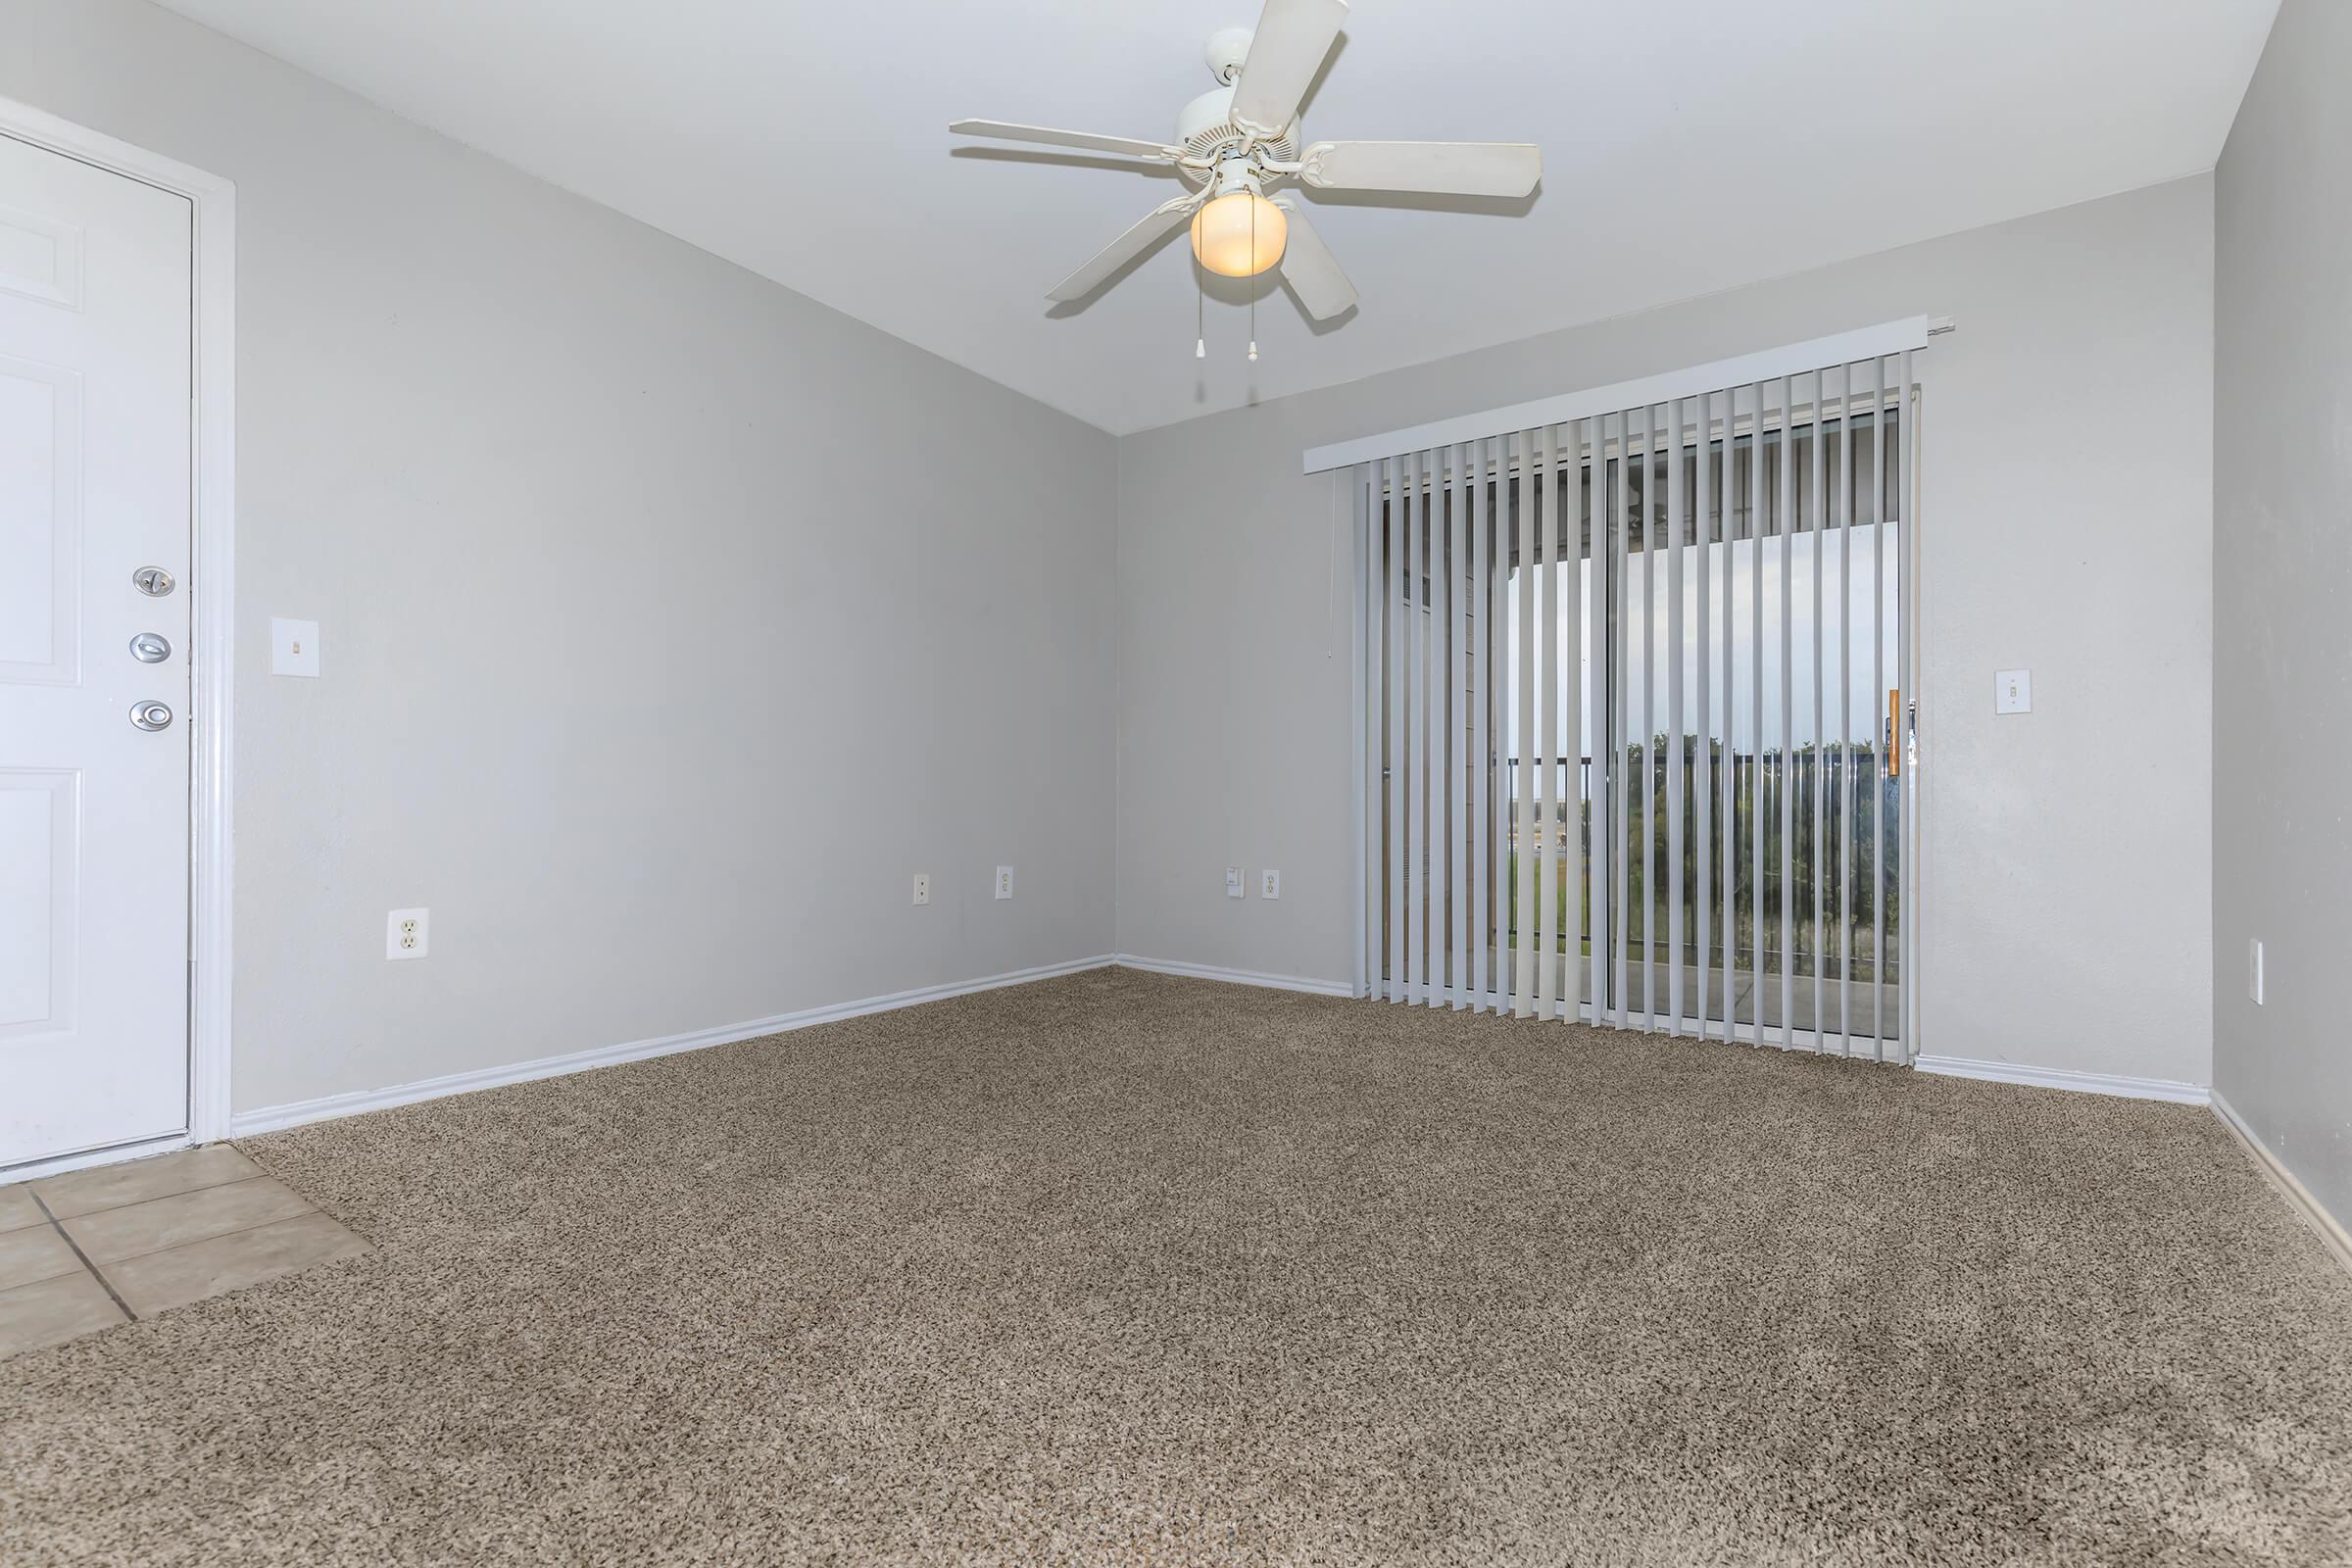 PLUSH CARPETING, VERTICAL BLINDS, AND CEILING FANS